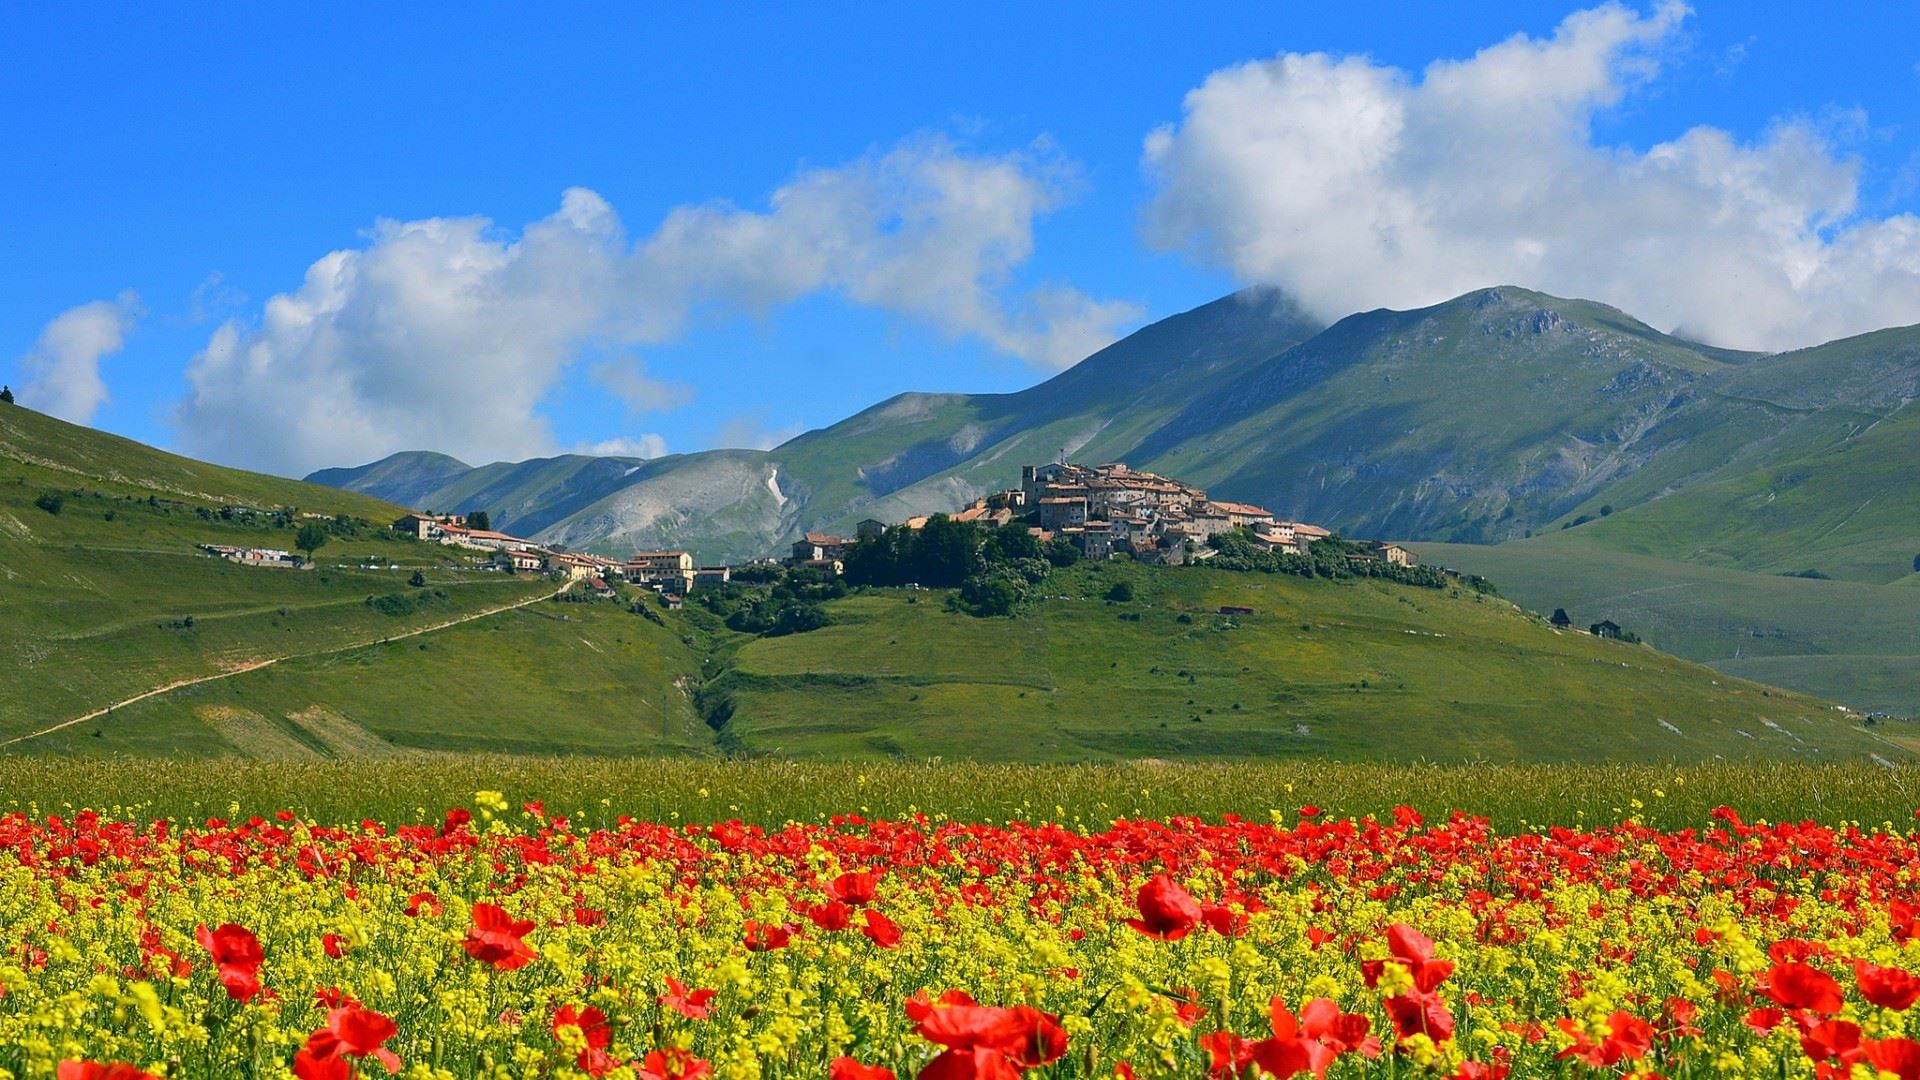 ♈ nature, landscape, clouds, trees, Italy, architecture, castle, hills, ancient, mountains, old building, village, field, flowers, grass, poppies, path, summer | 1920×1080 -【唯美小筑】